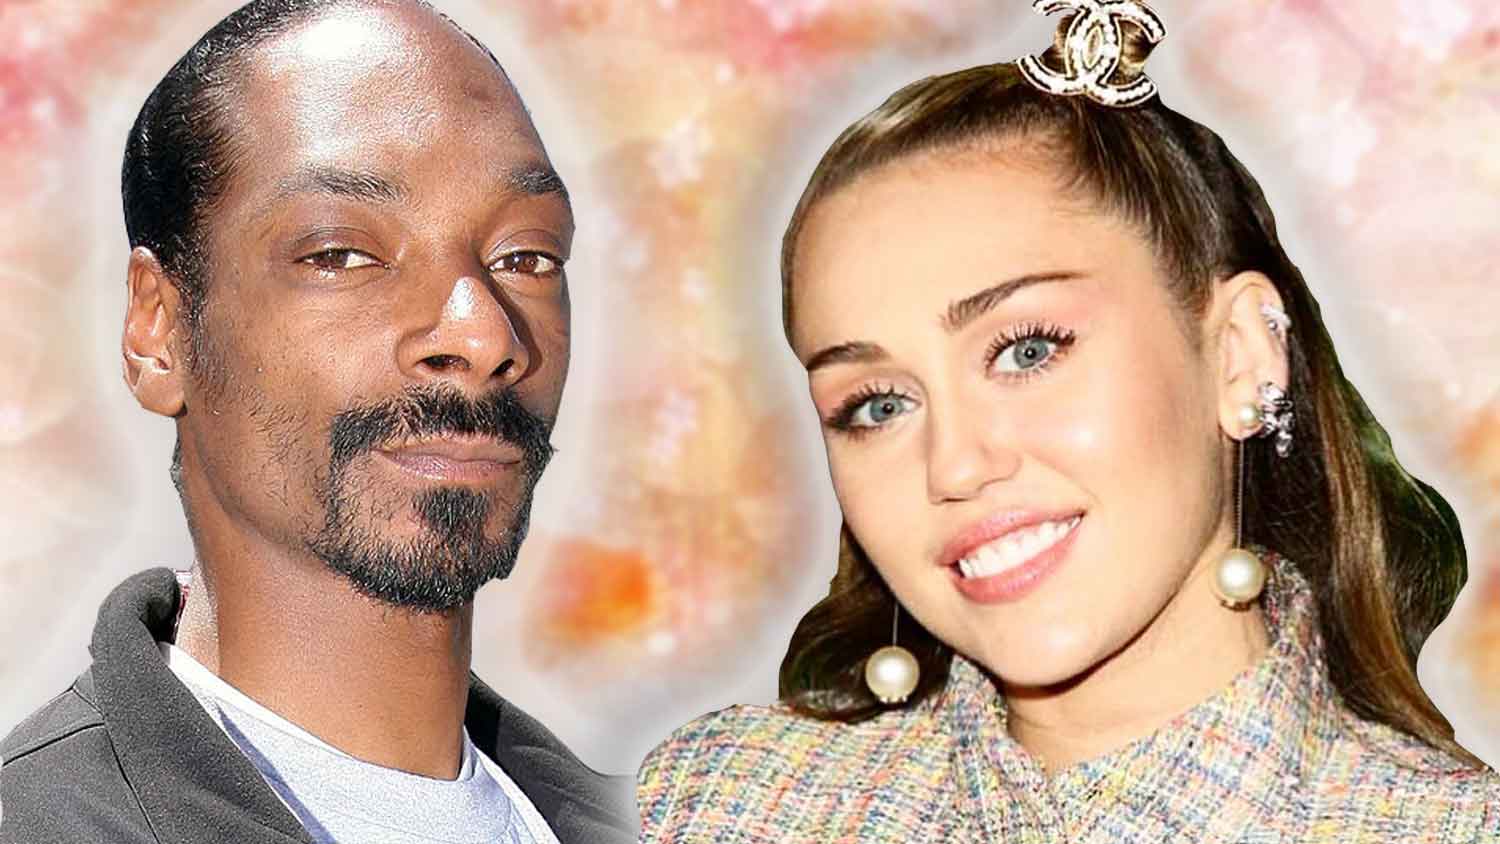 Miley Cyrus, Snoop Dogg, and Like 100 Other Celebs Release Song for Climate Change